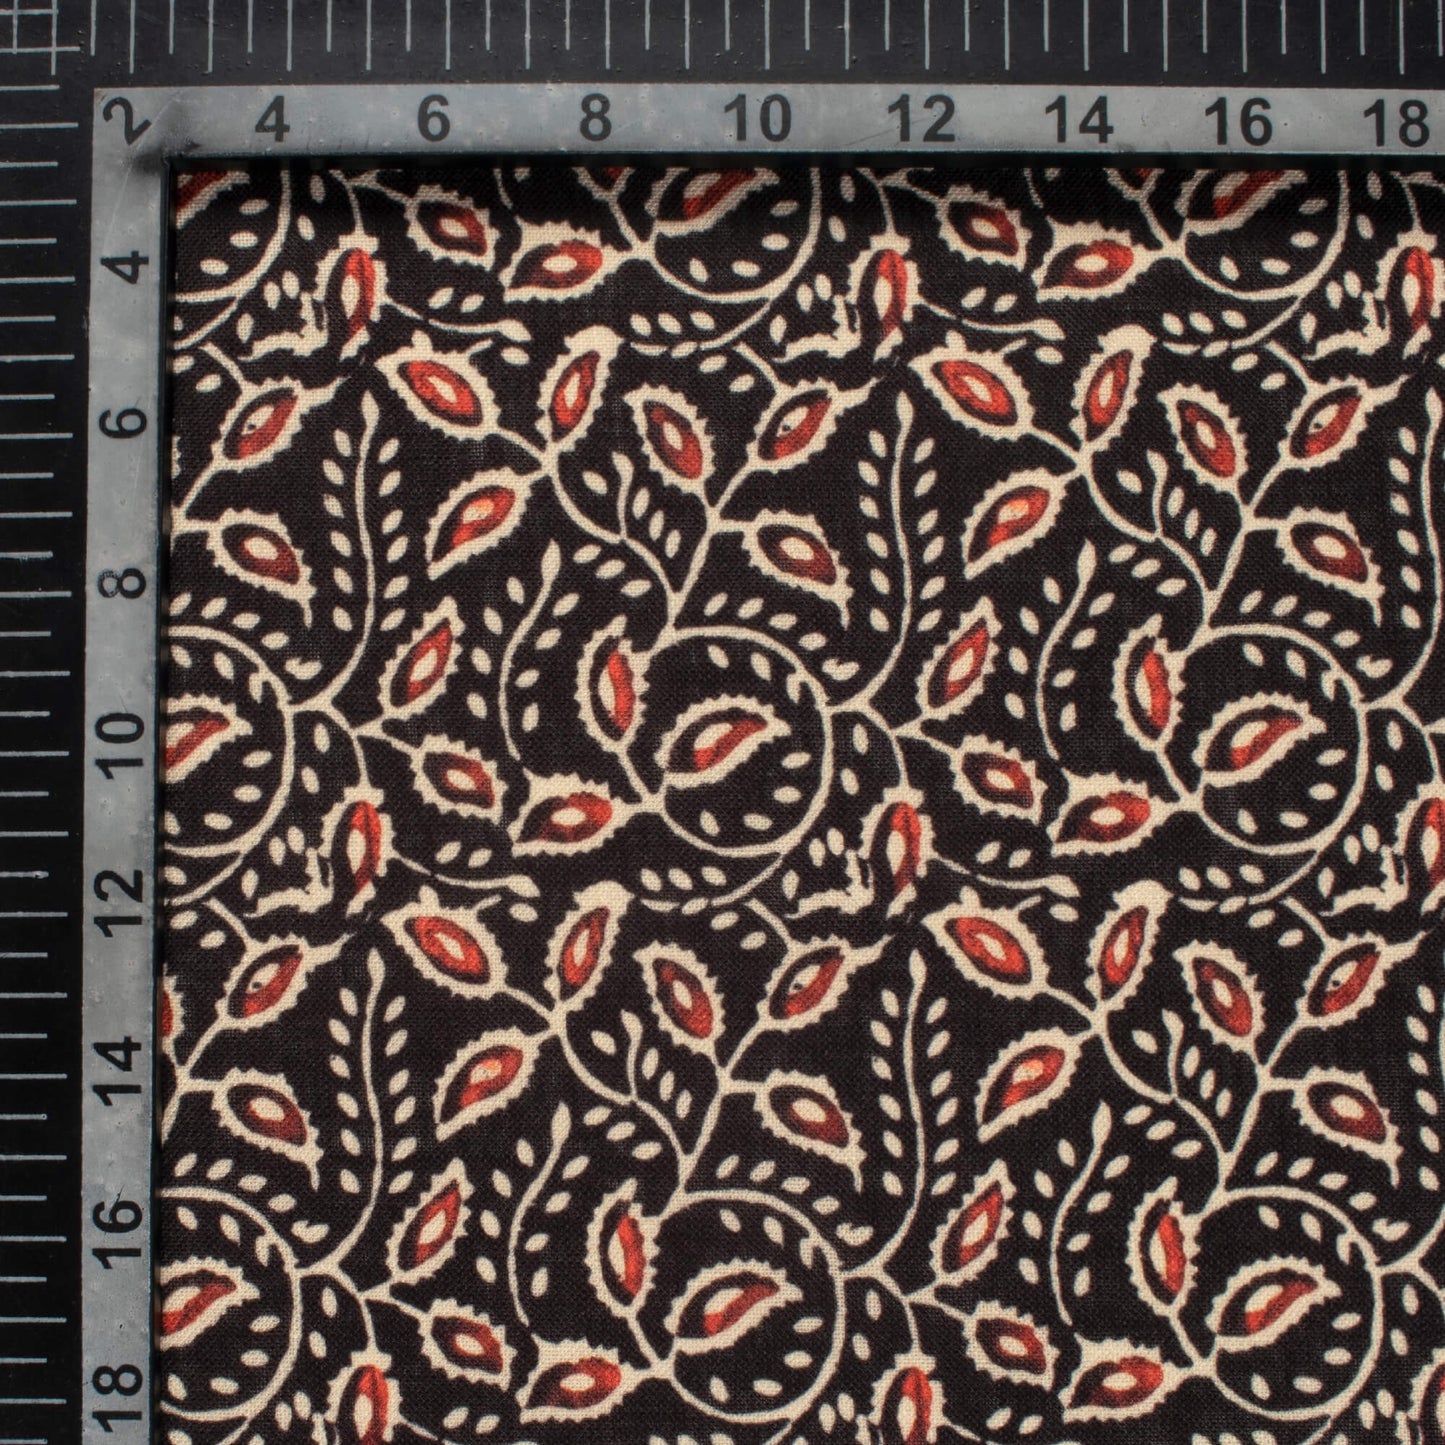 Black And Barn Red Ajrakh Pattern Digital Print Linen Textured Fabric (Width 56 Inches)